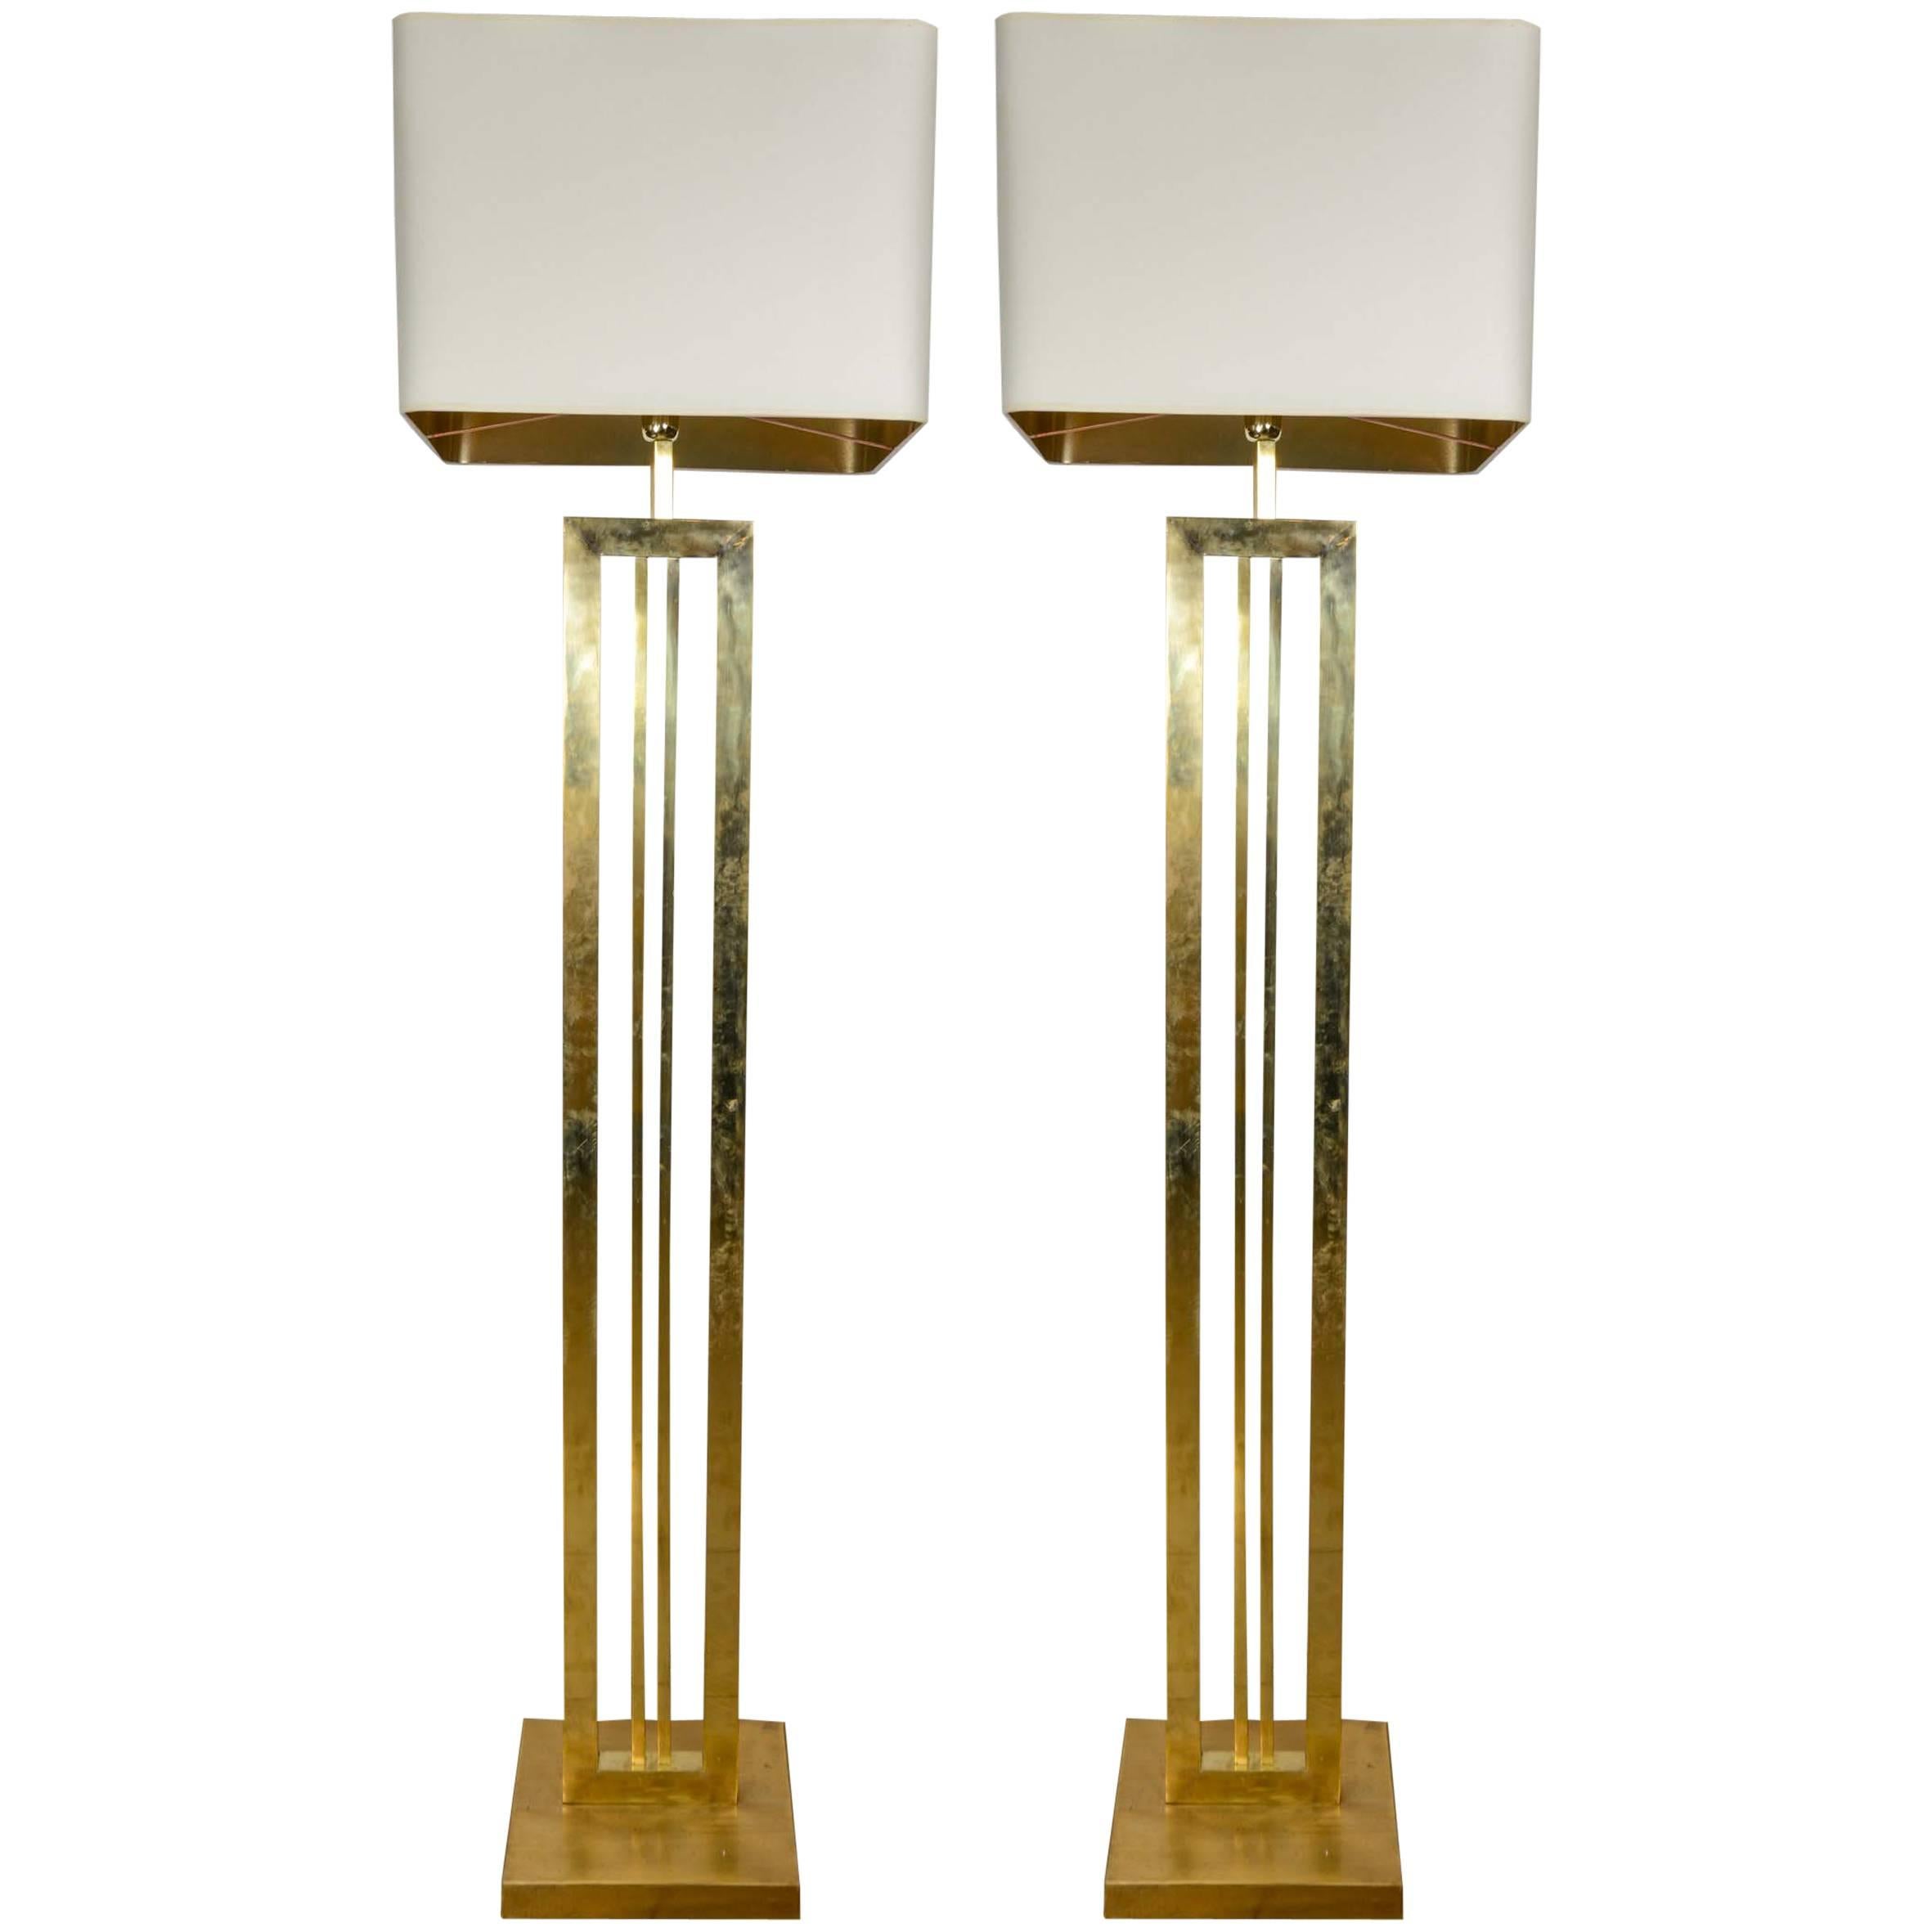 Pair of Brass Floor Lamps at cost price.